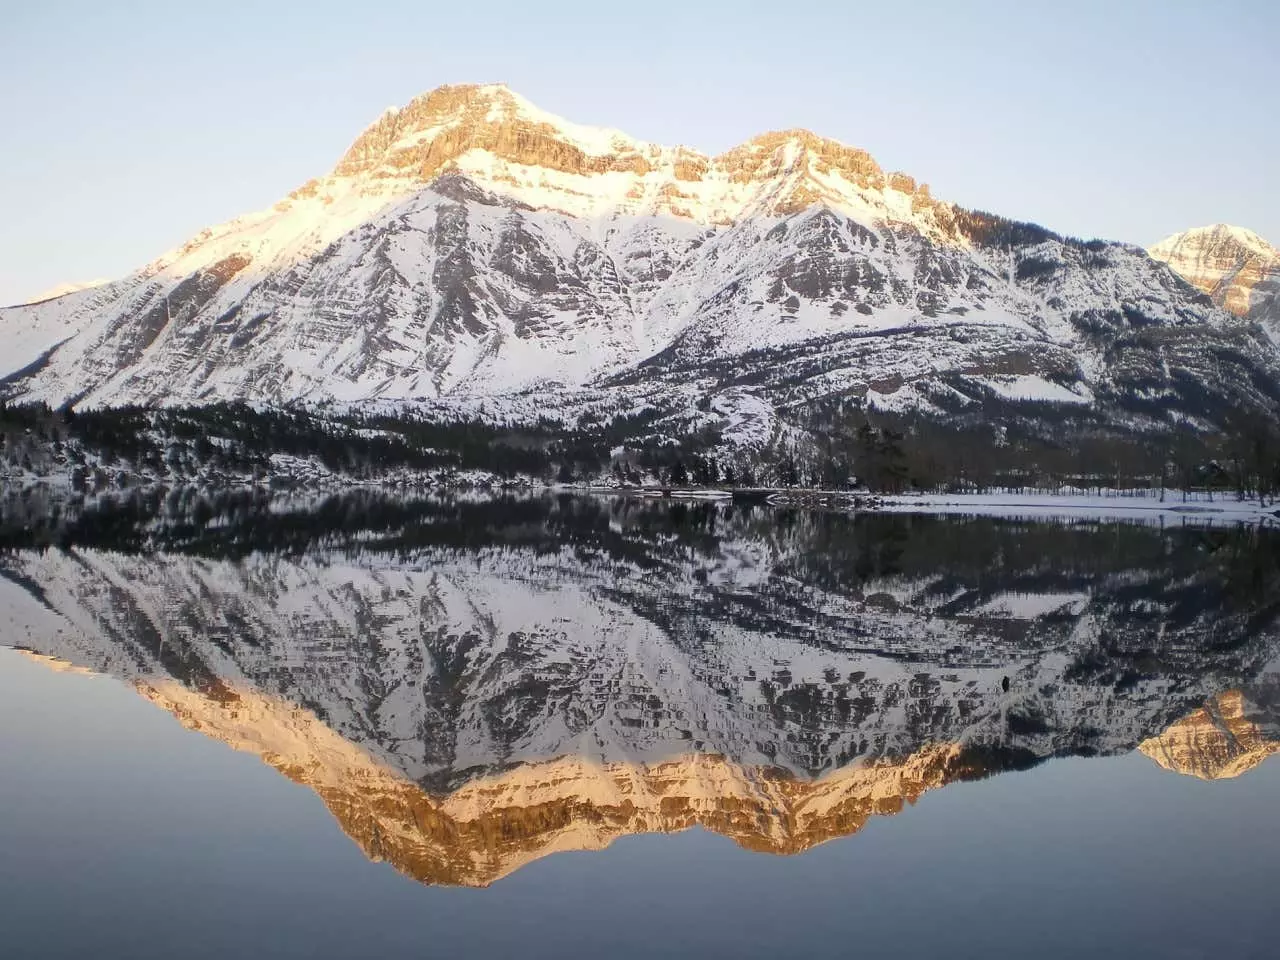 A lake reflecting the mountains in Waterton Lakes National Park